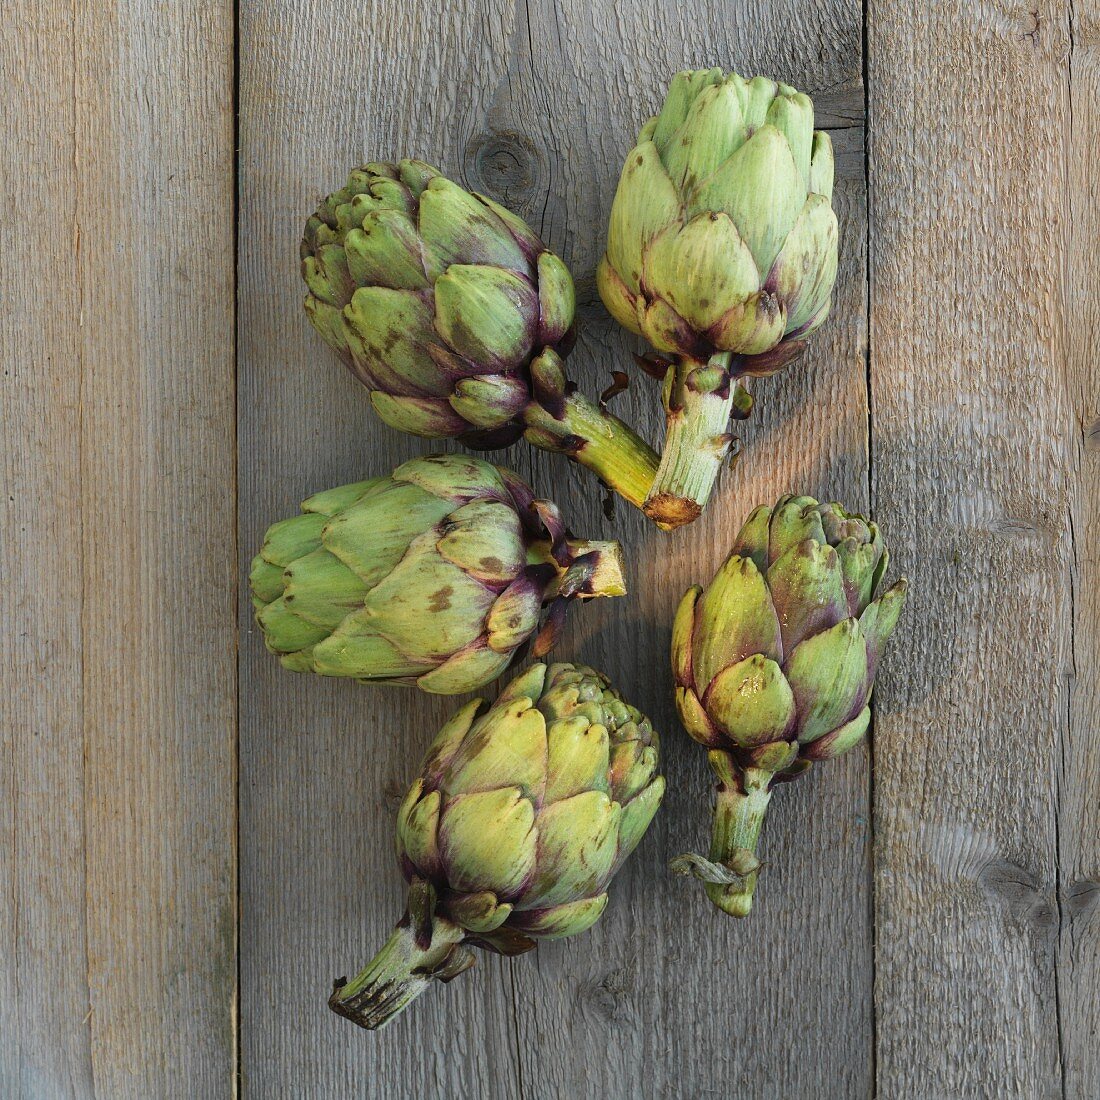 Five artichokes on a wooden surface